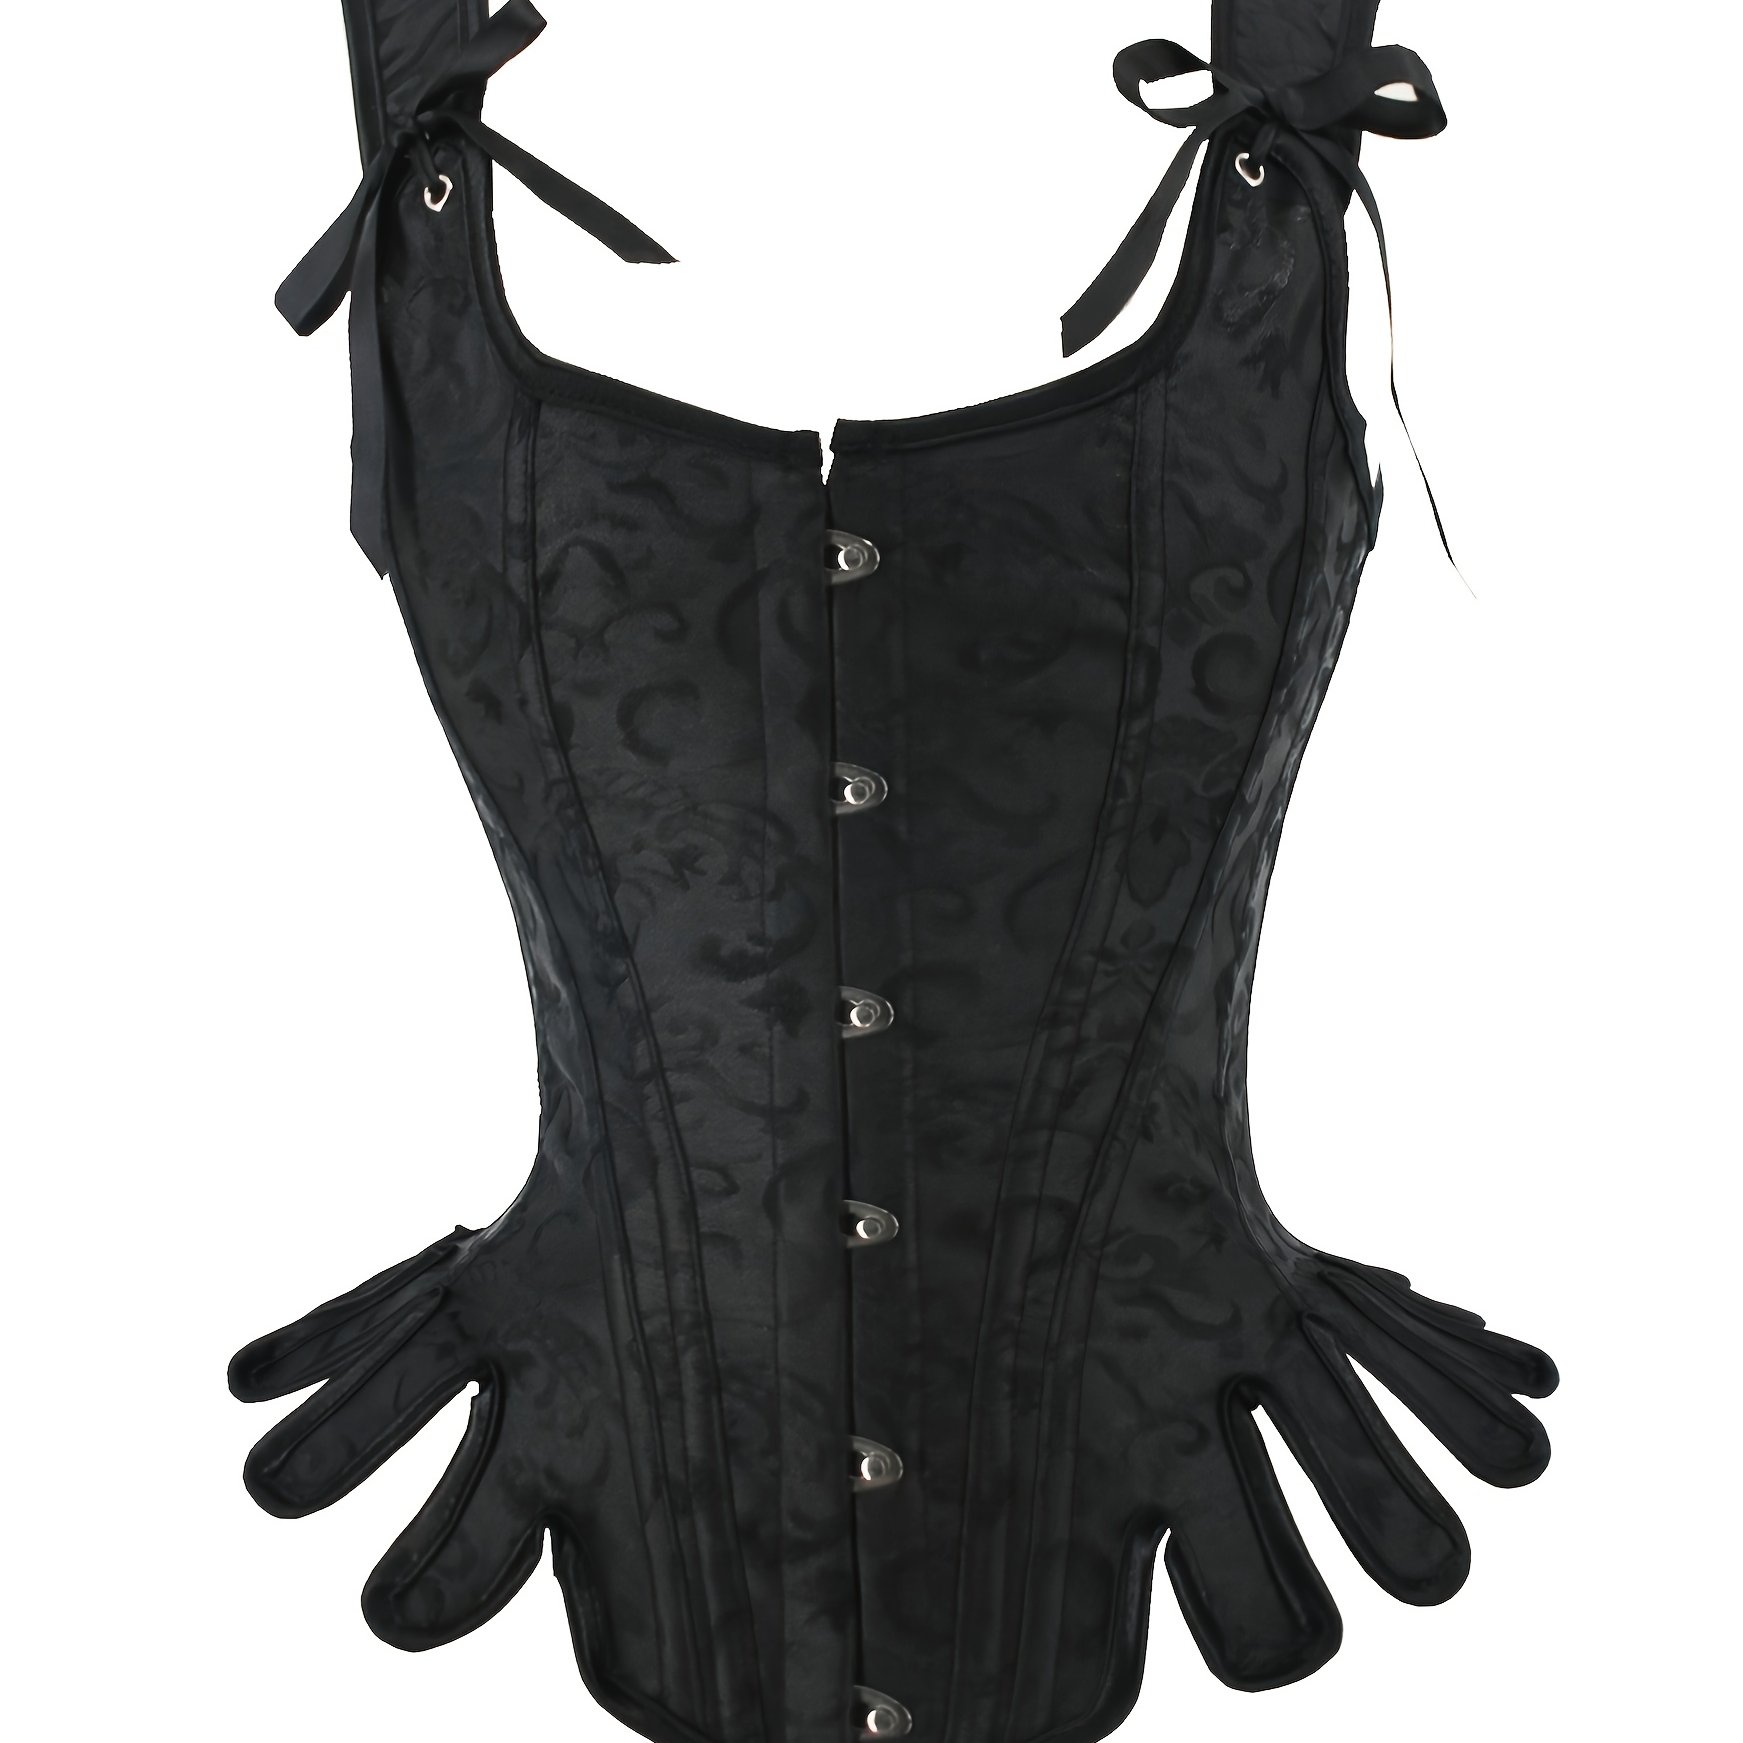 Cocona Black | Bustier Corset Top w/ Lace Up Back